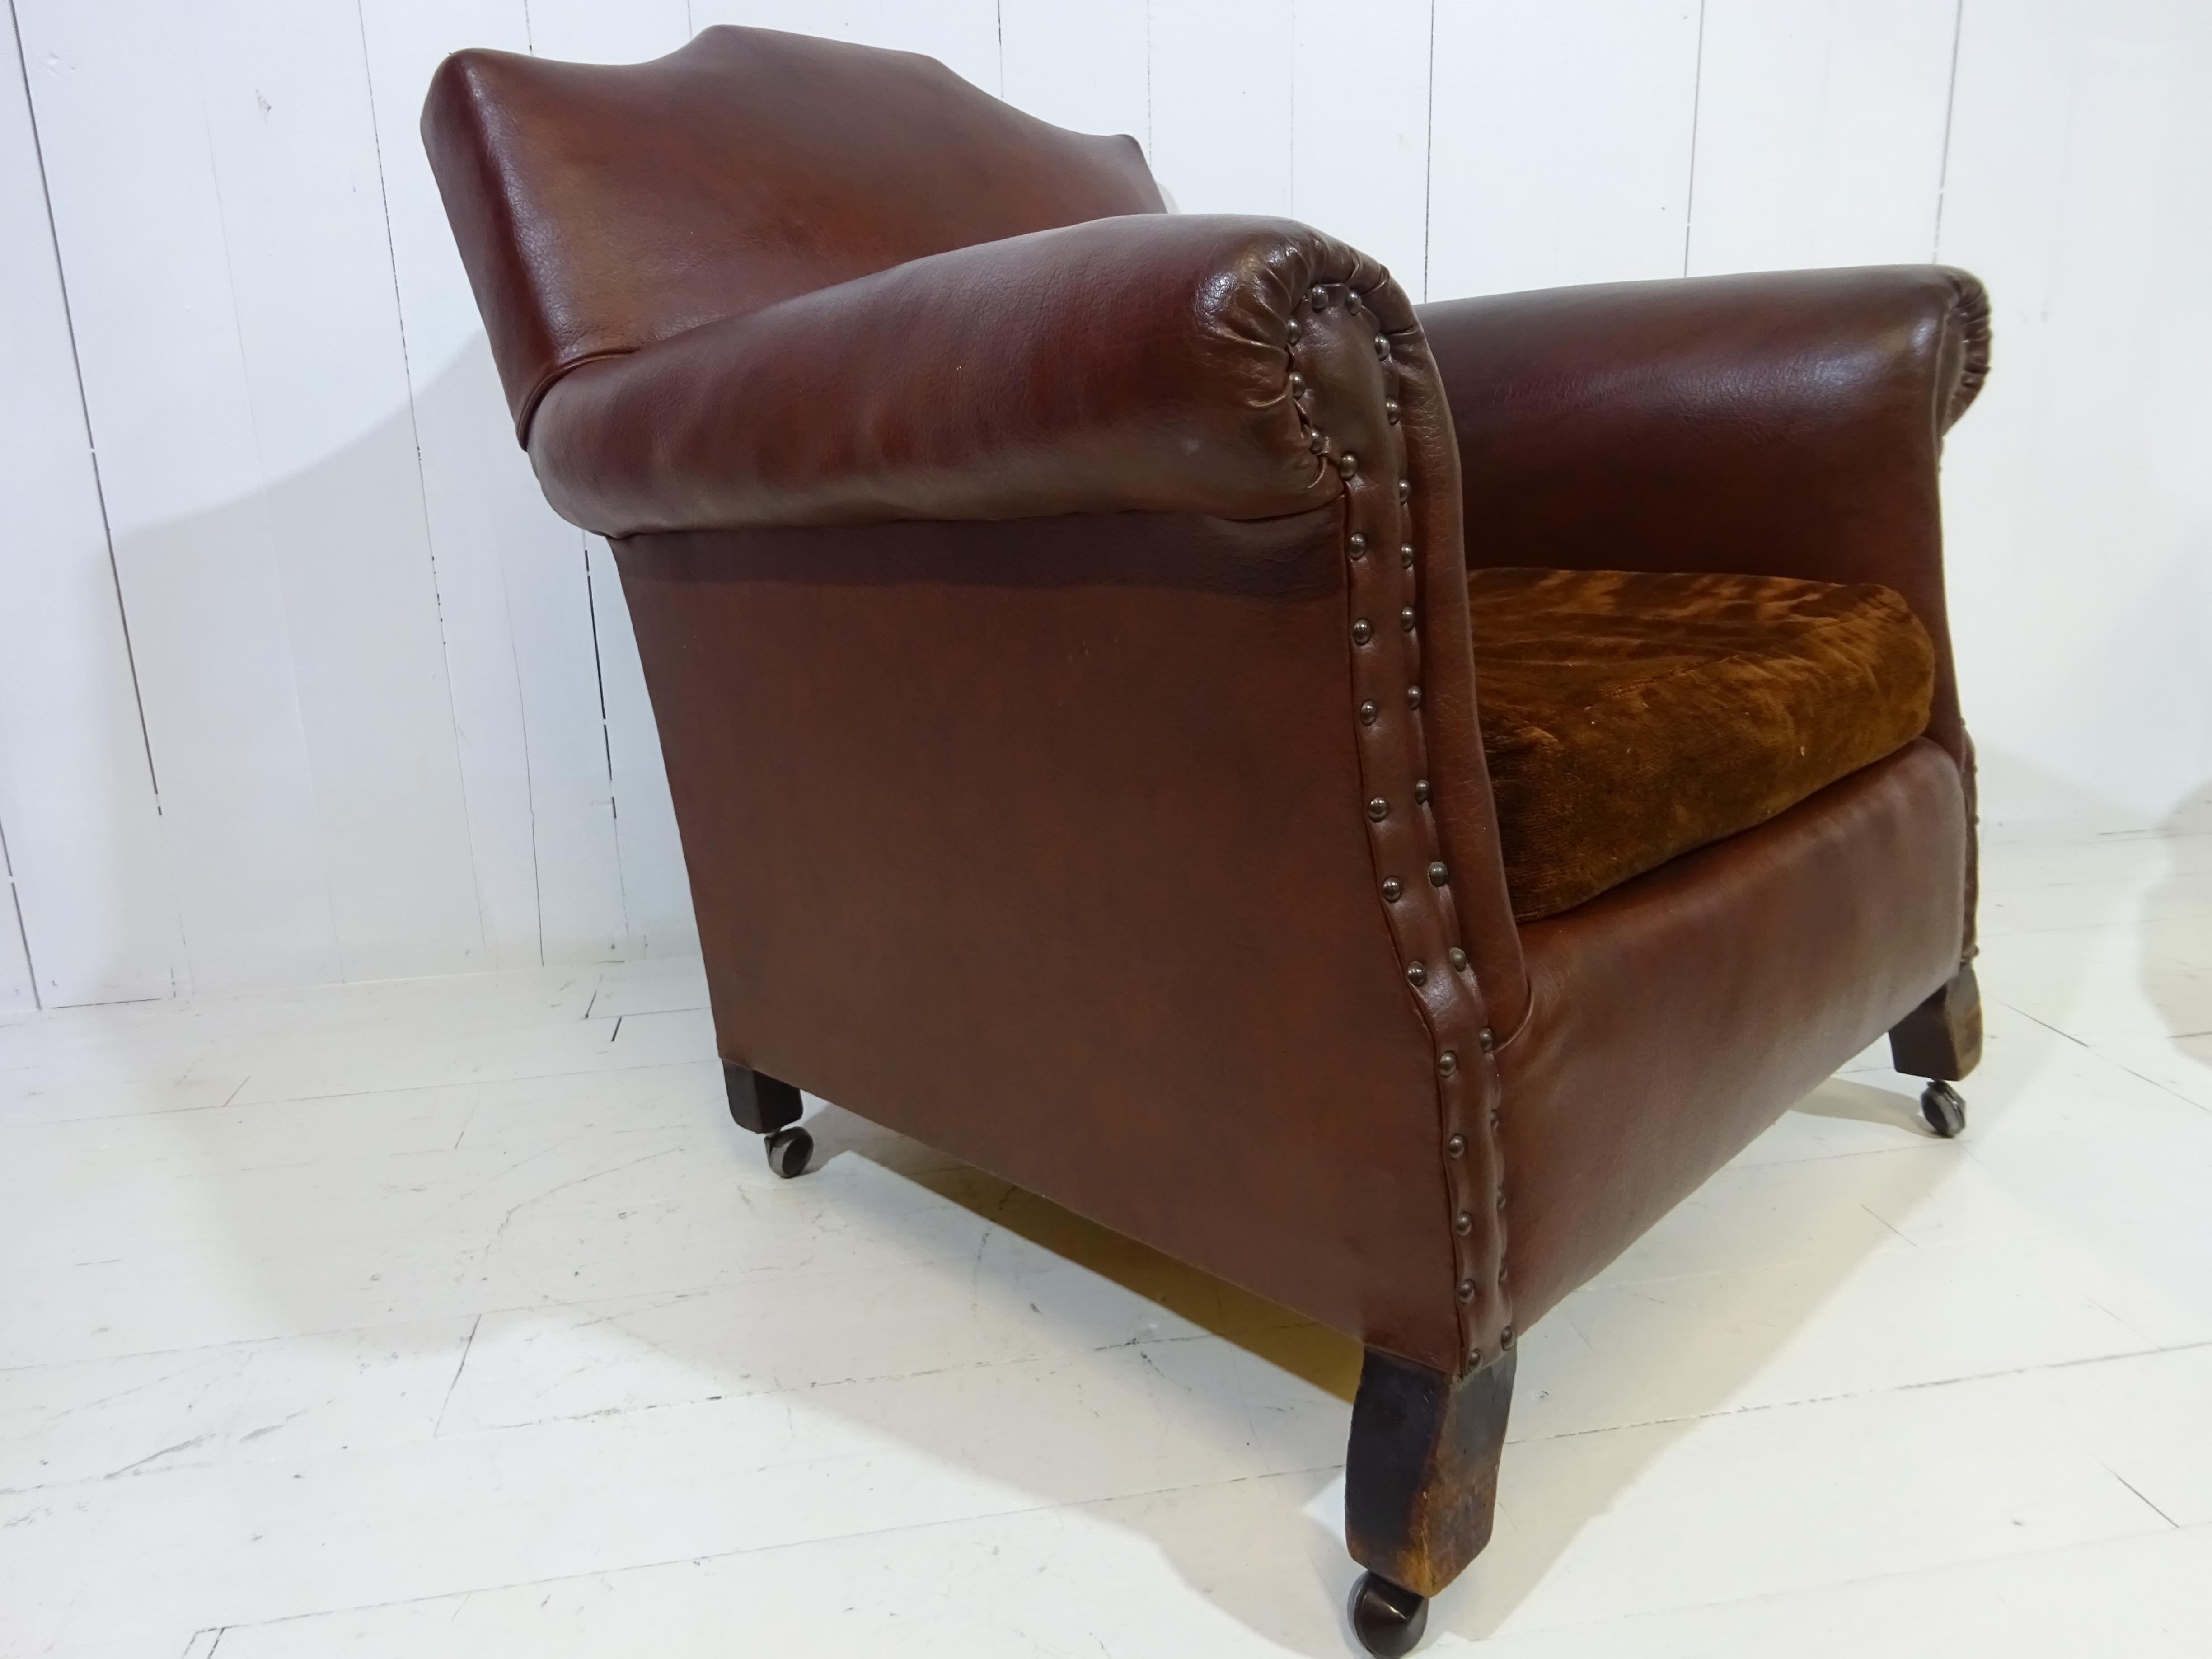 Original 1920's Art Deco Club Chair in Brown Faux Leather 2